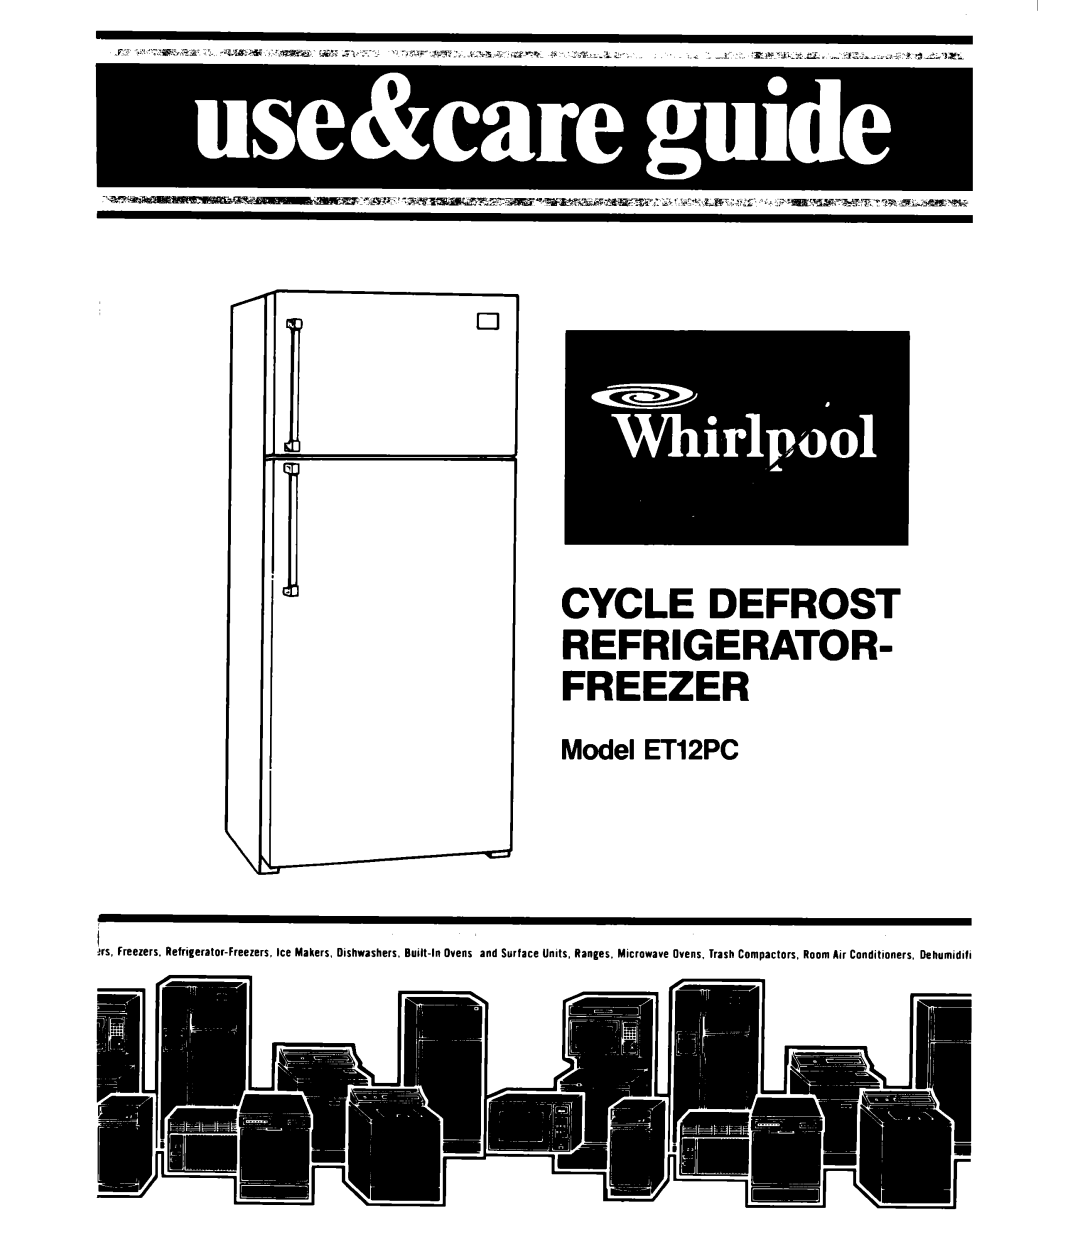 Whirlpool manual Cycle Defrost Refrigerator Freezer, Model ET12PC 